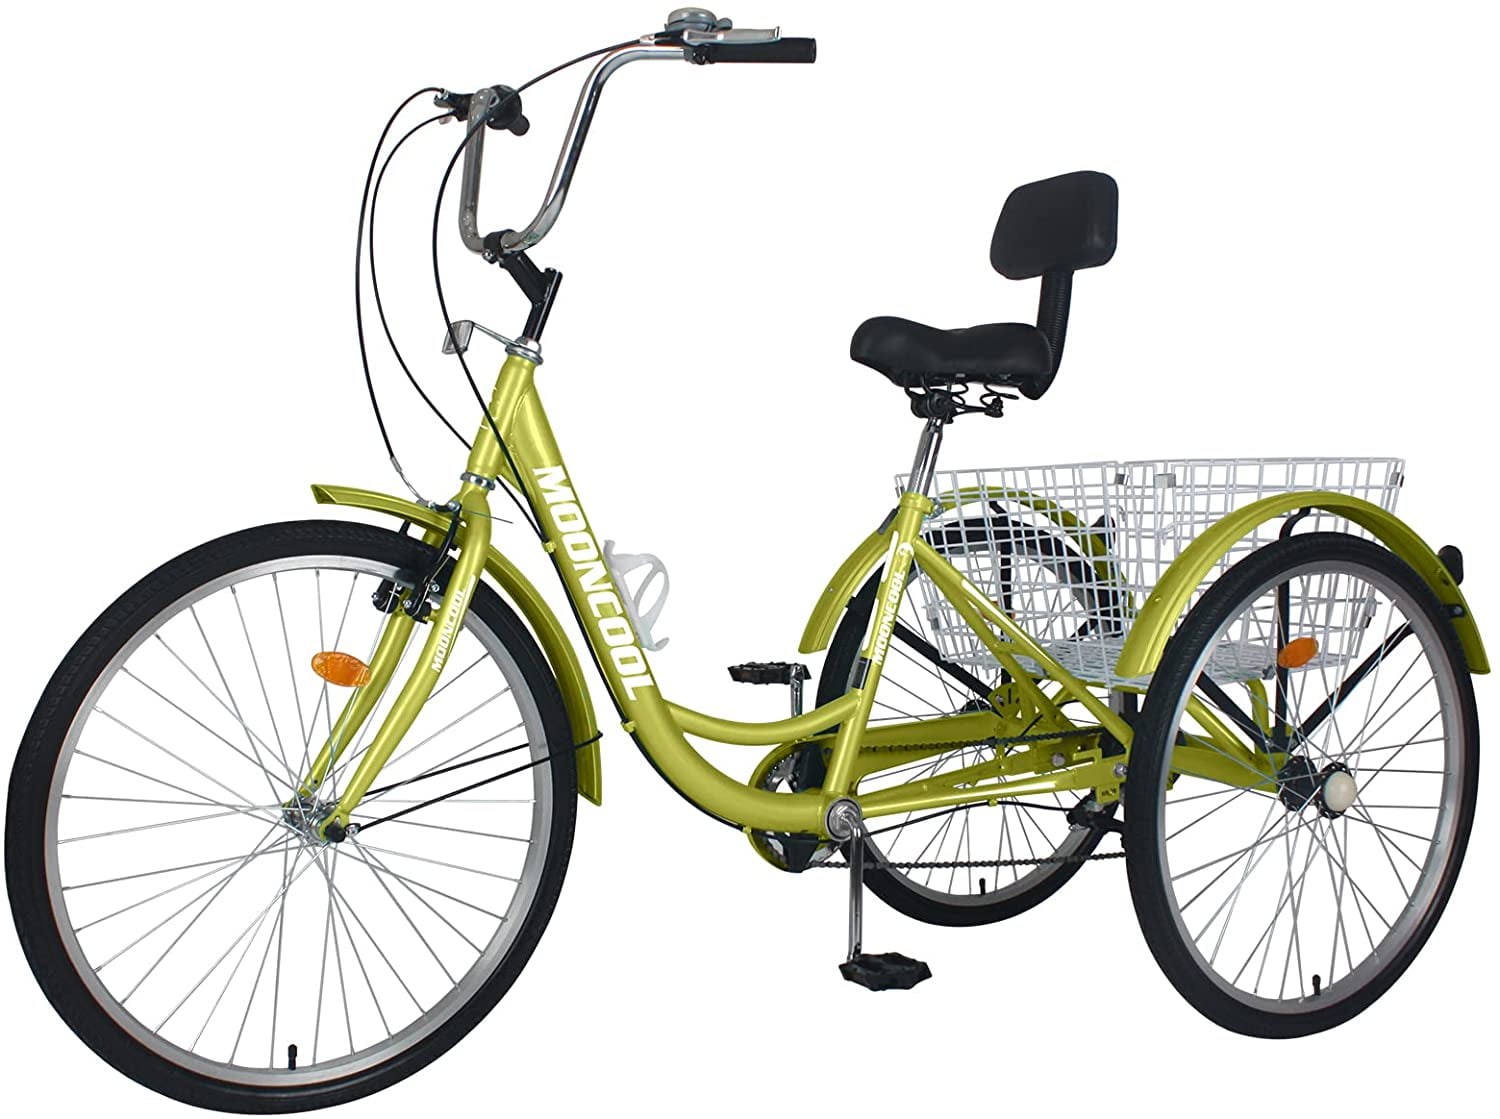 20" Adult Tricycle 3-Wheel Trike Cruiser Bicycle w/Basket for Shopping Yellow 